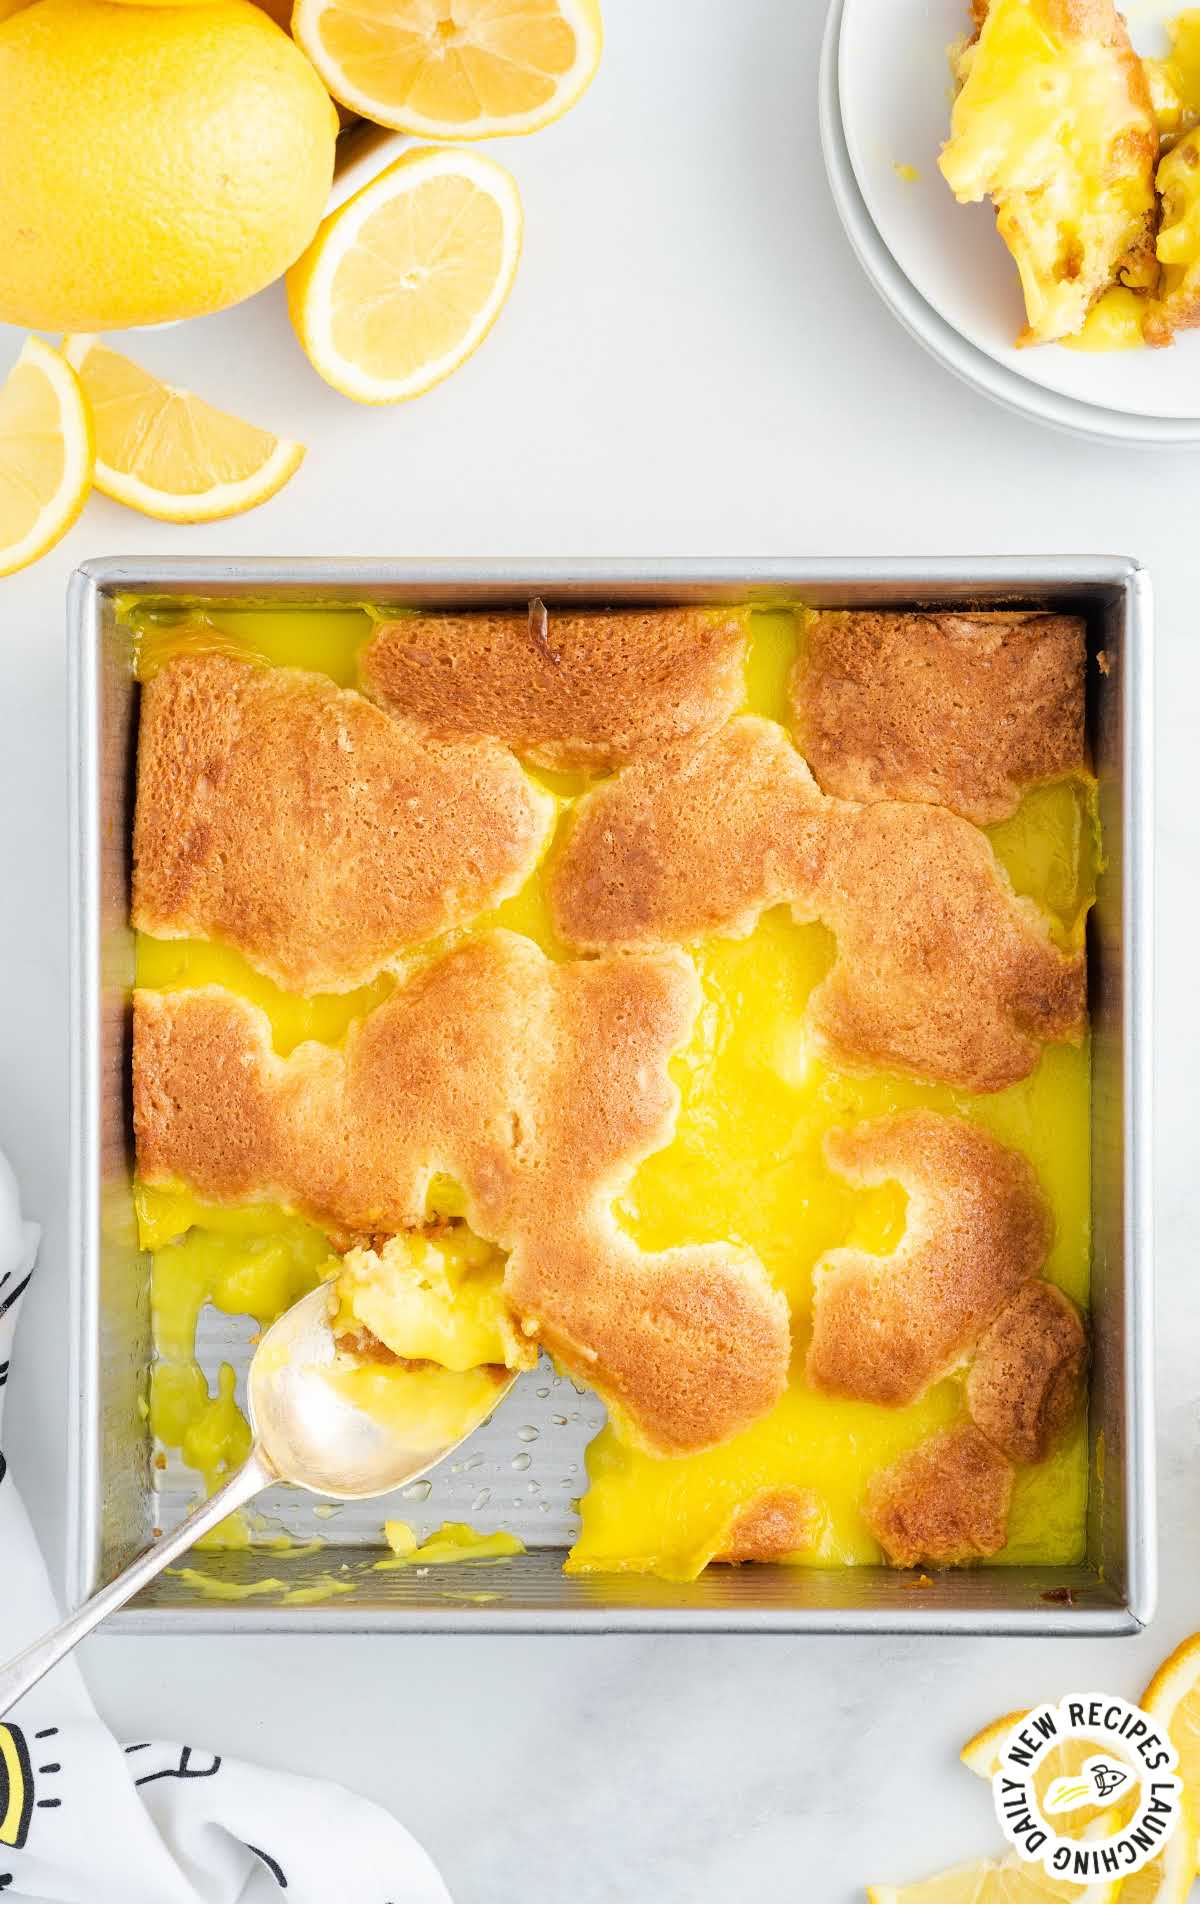 Lemon Cobbler in a baking dish with a spoon